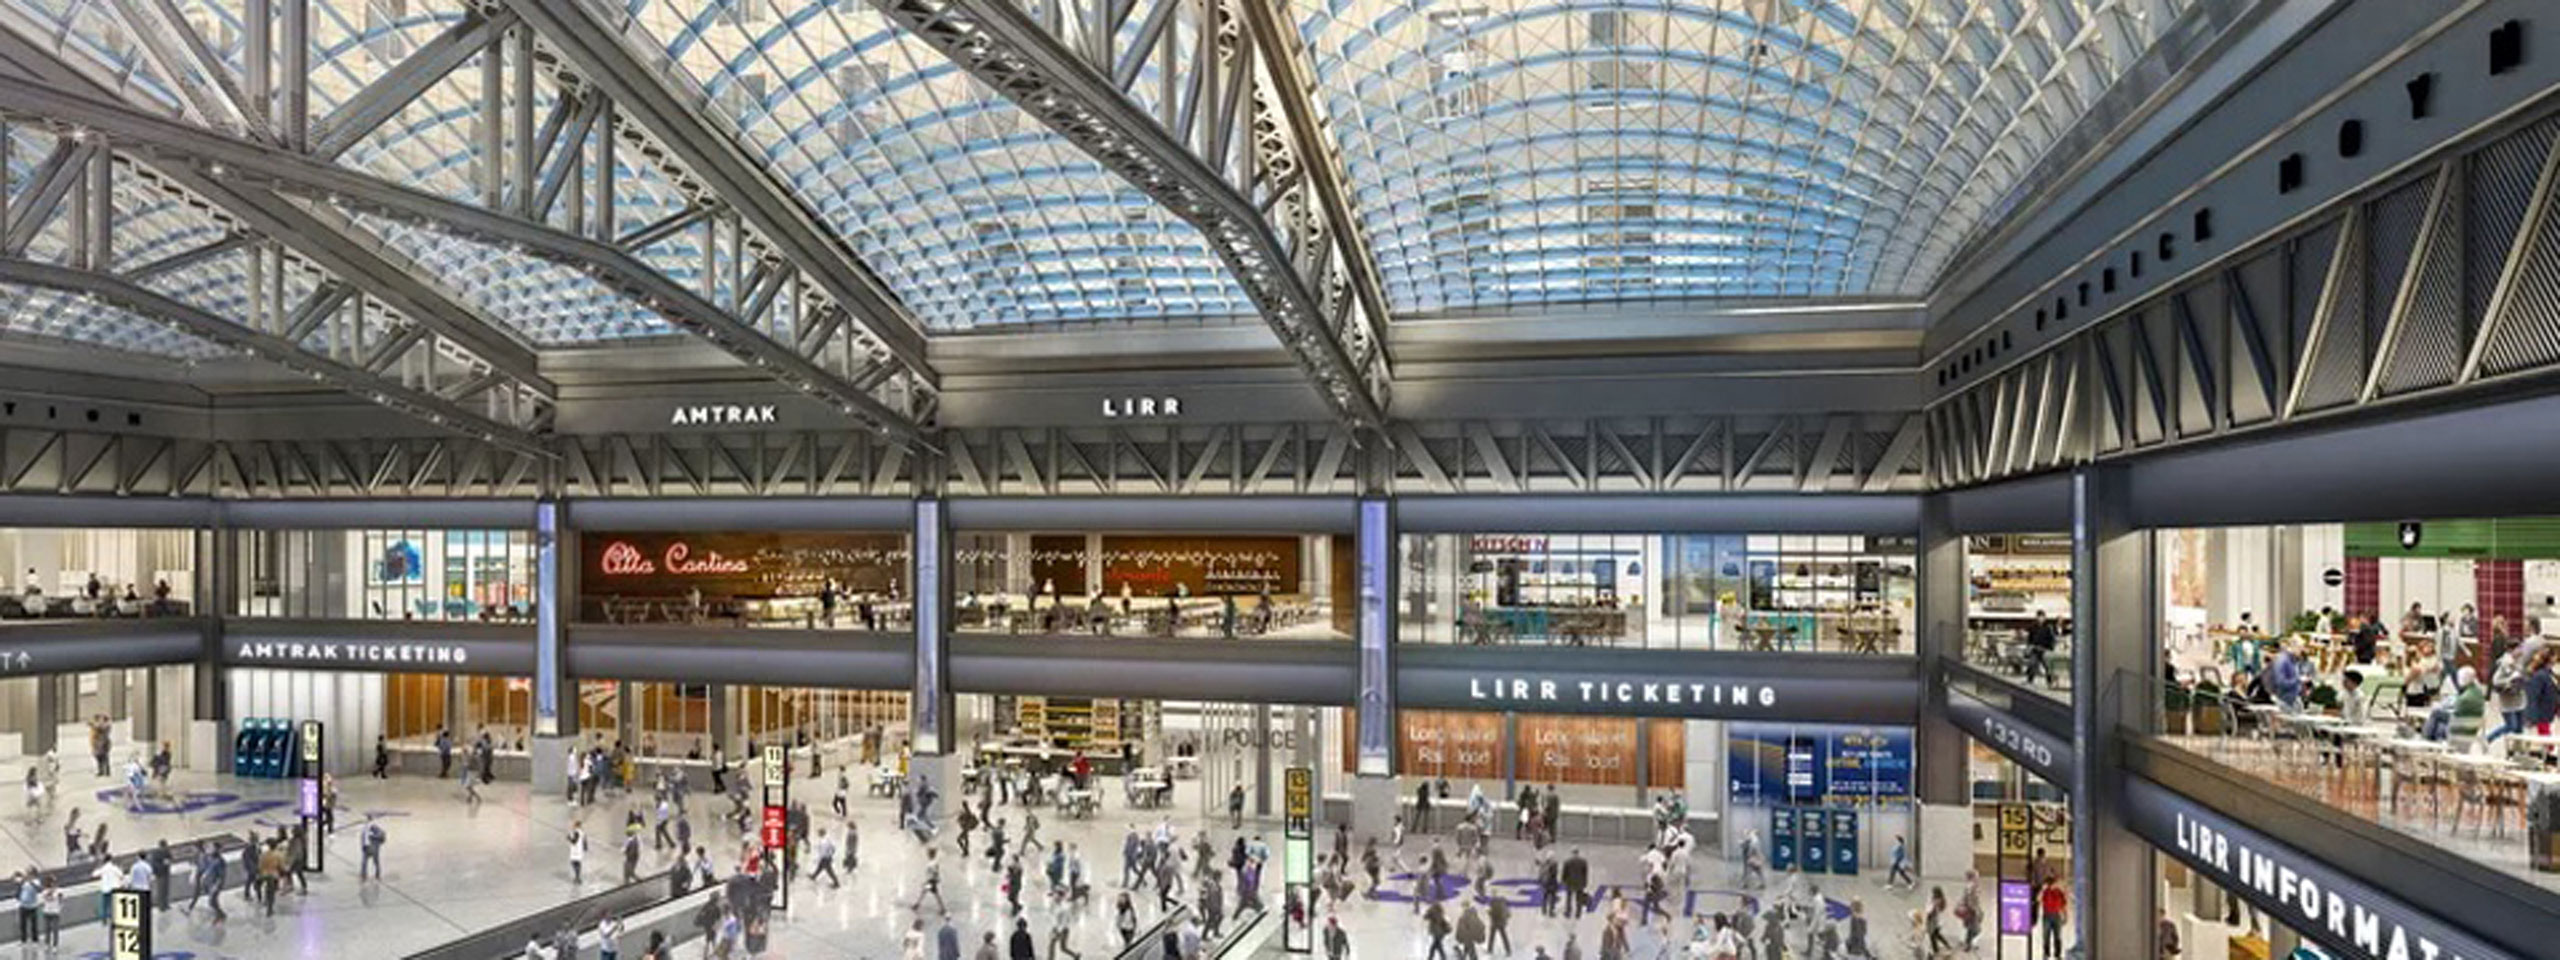 A rendering of a possible future design for Penn Station 